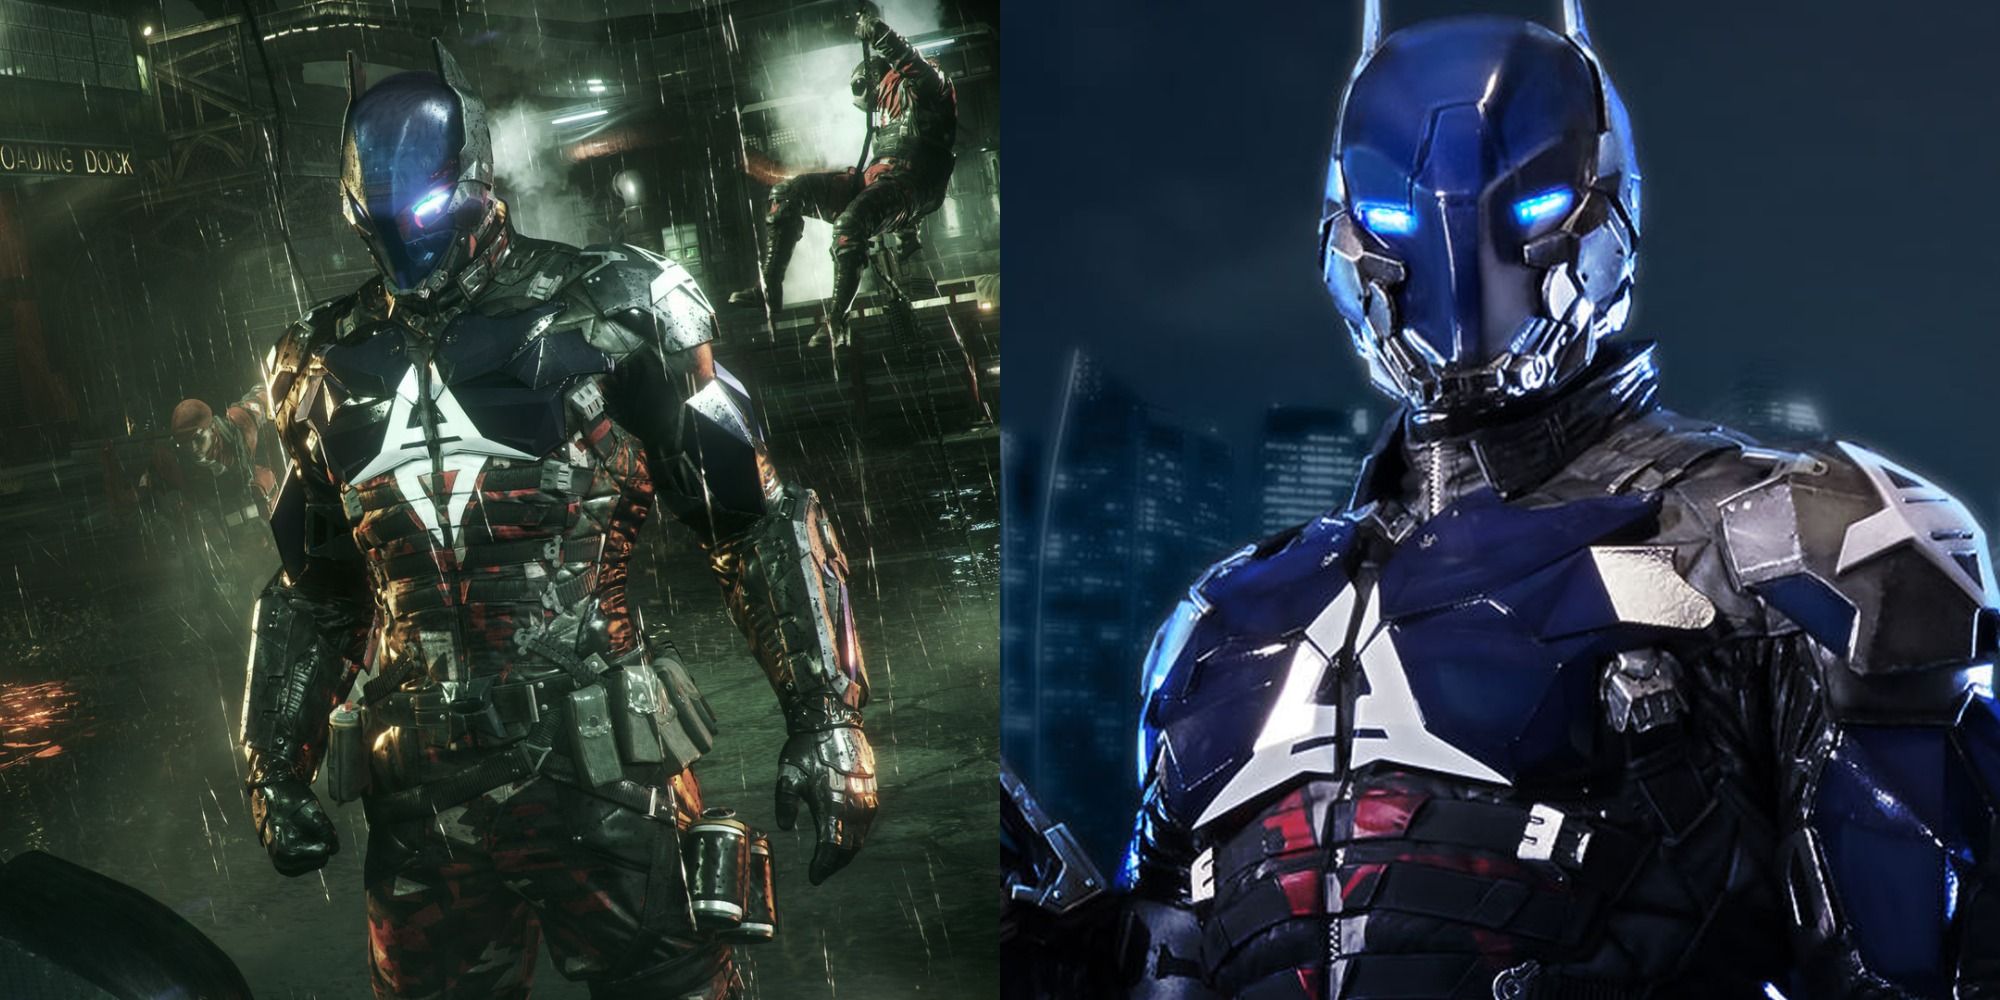 10 Best Quotes By The Arkham Knight In The Arkham Knight Video Game